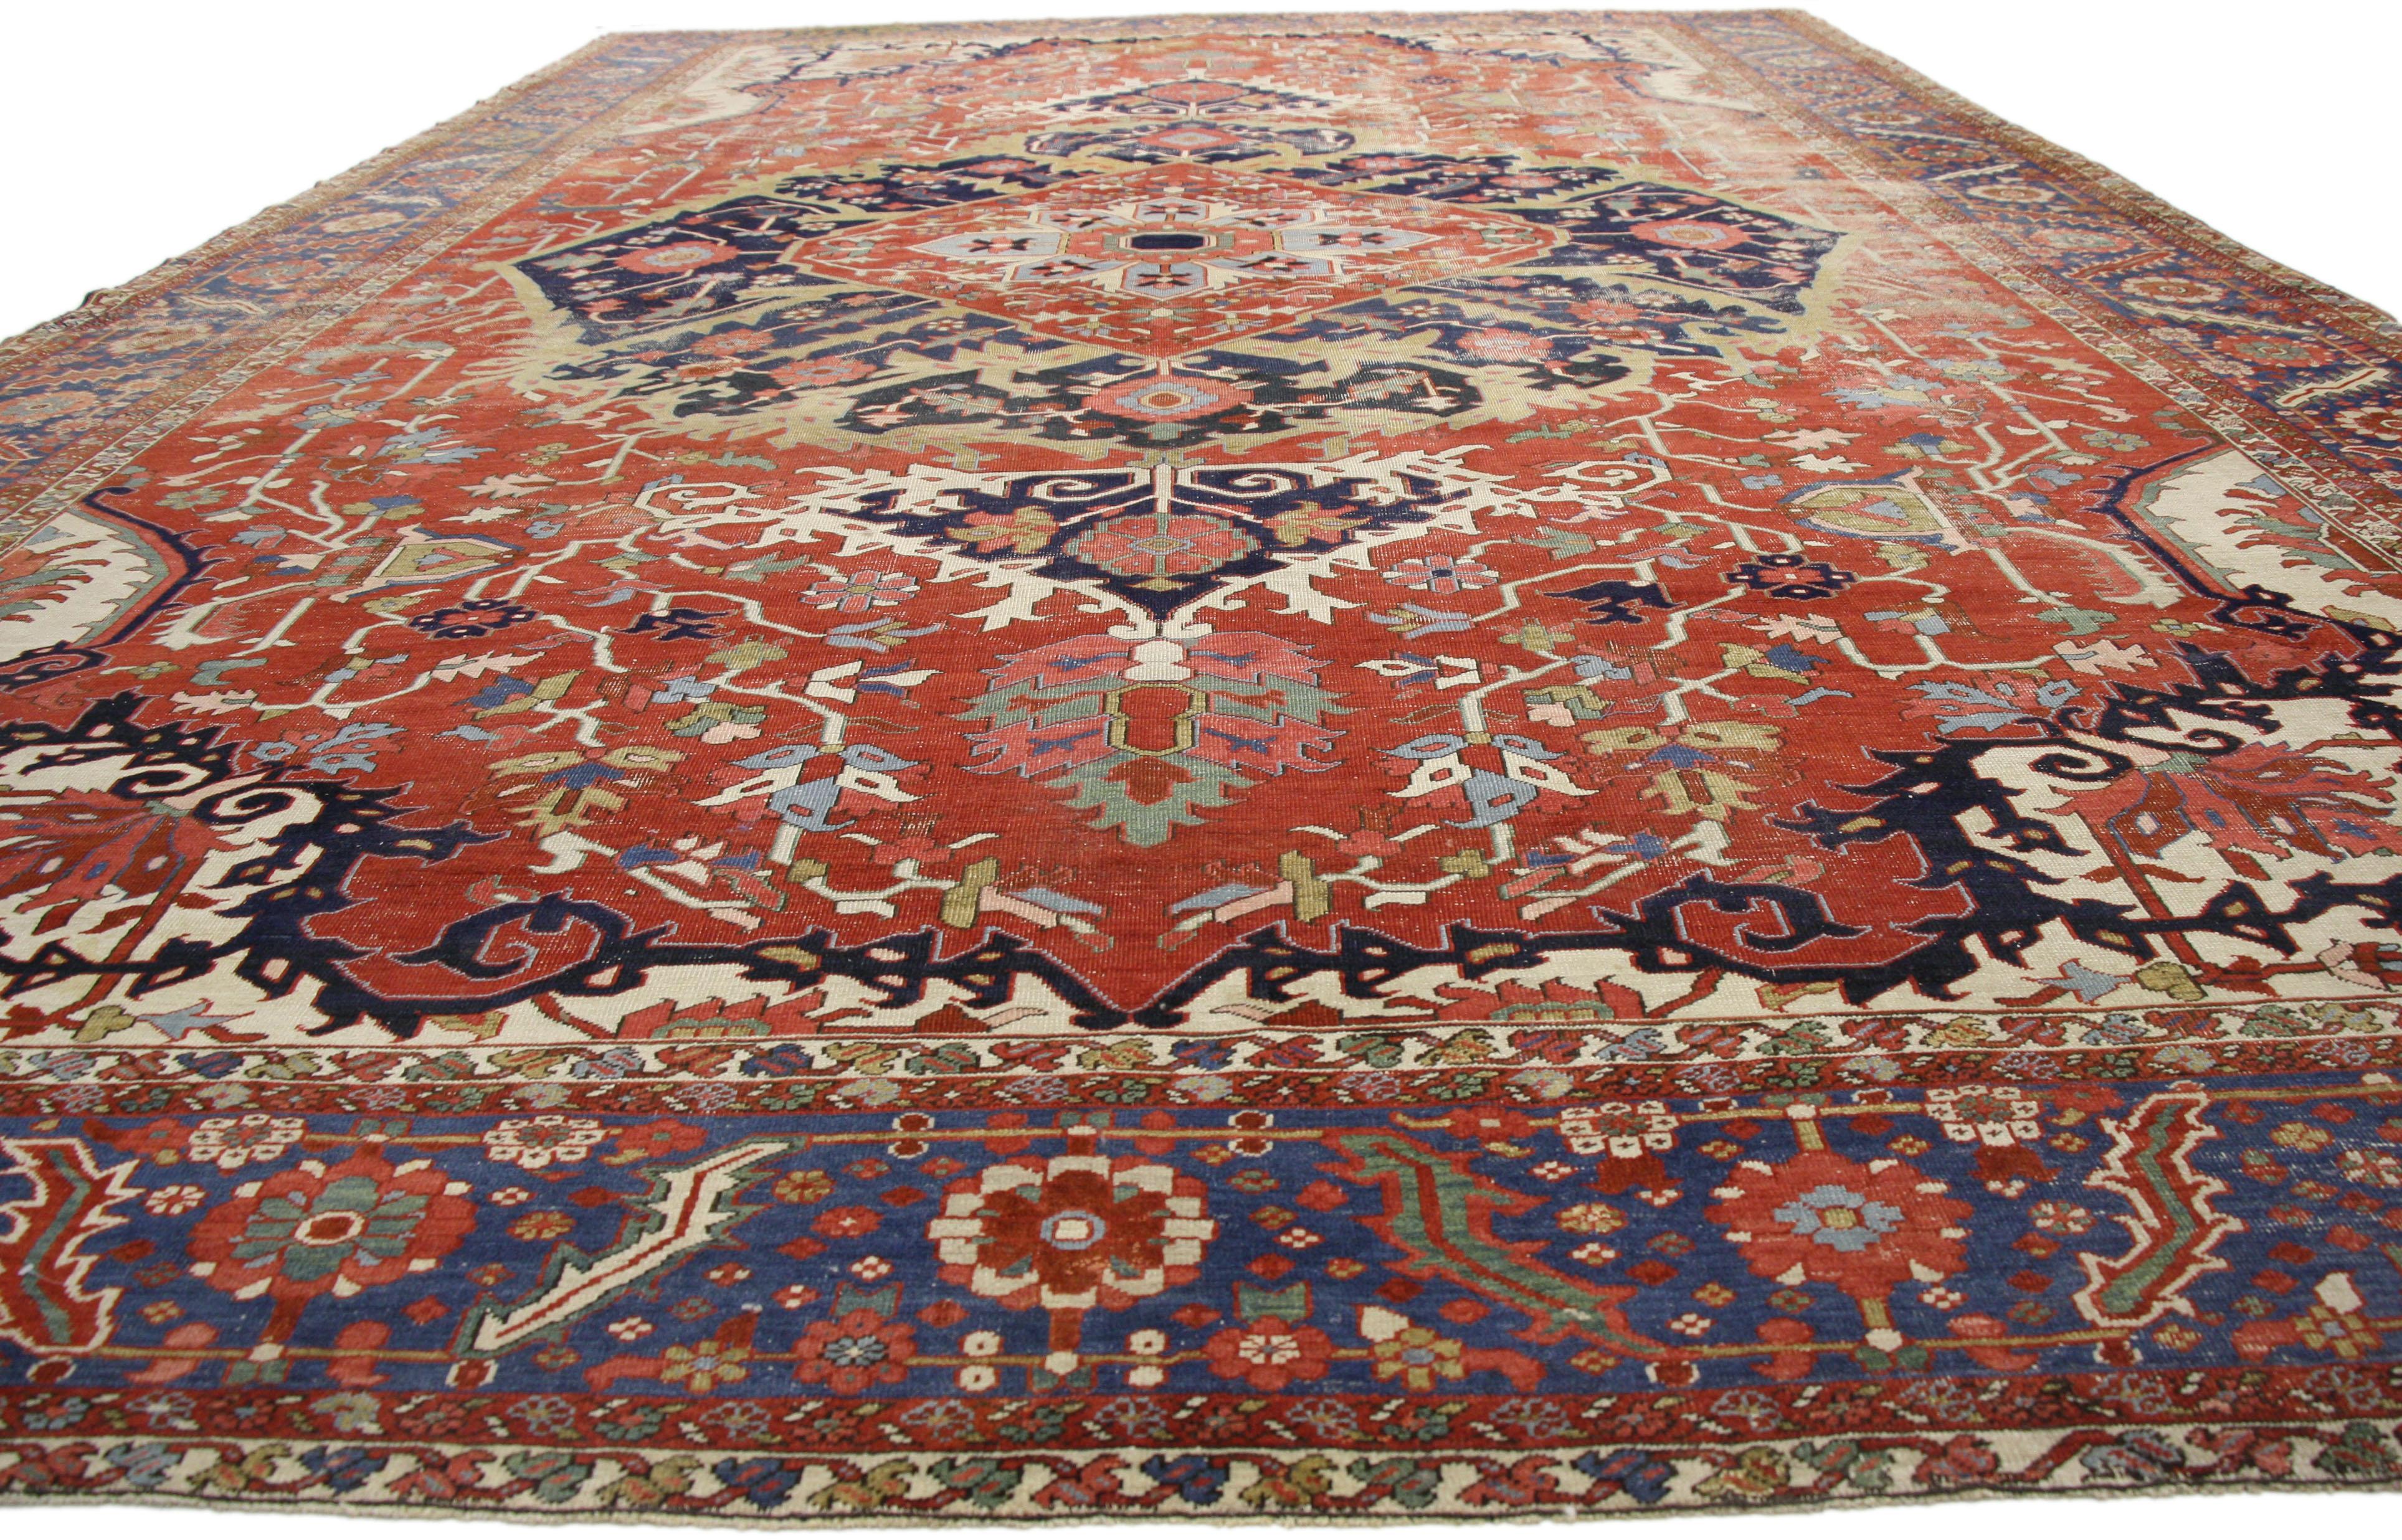 52303 Distressed Antique-Worn Persian Serapi Rug, 13'00 x 19'10. 
With timeless appeal, refined colors, and architectural design elements, this hand knotted wool distressed antique Persian Serapi palace rug can beautifully blend contemporary and